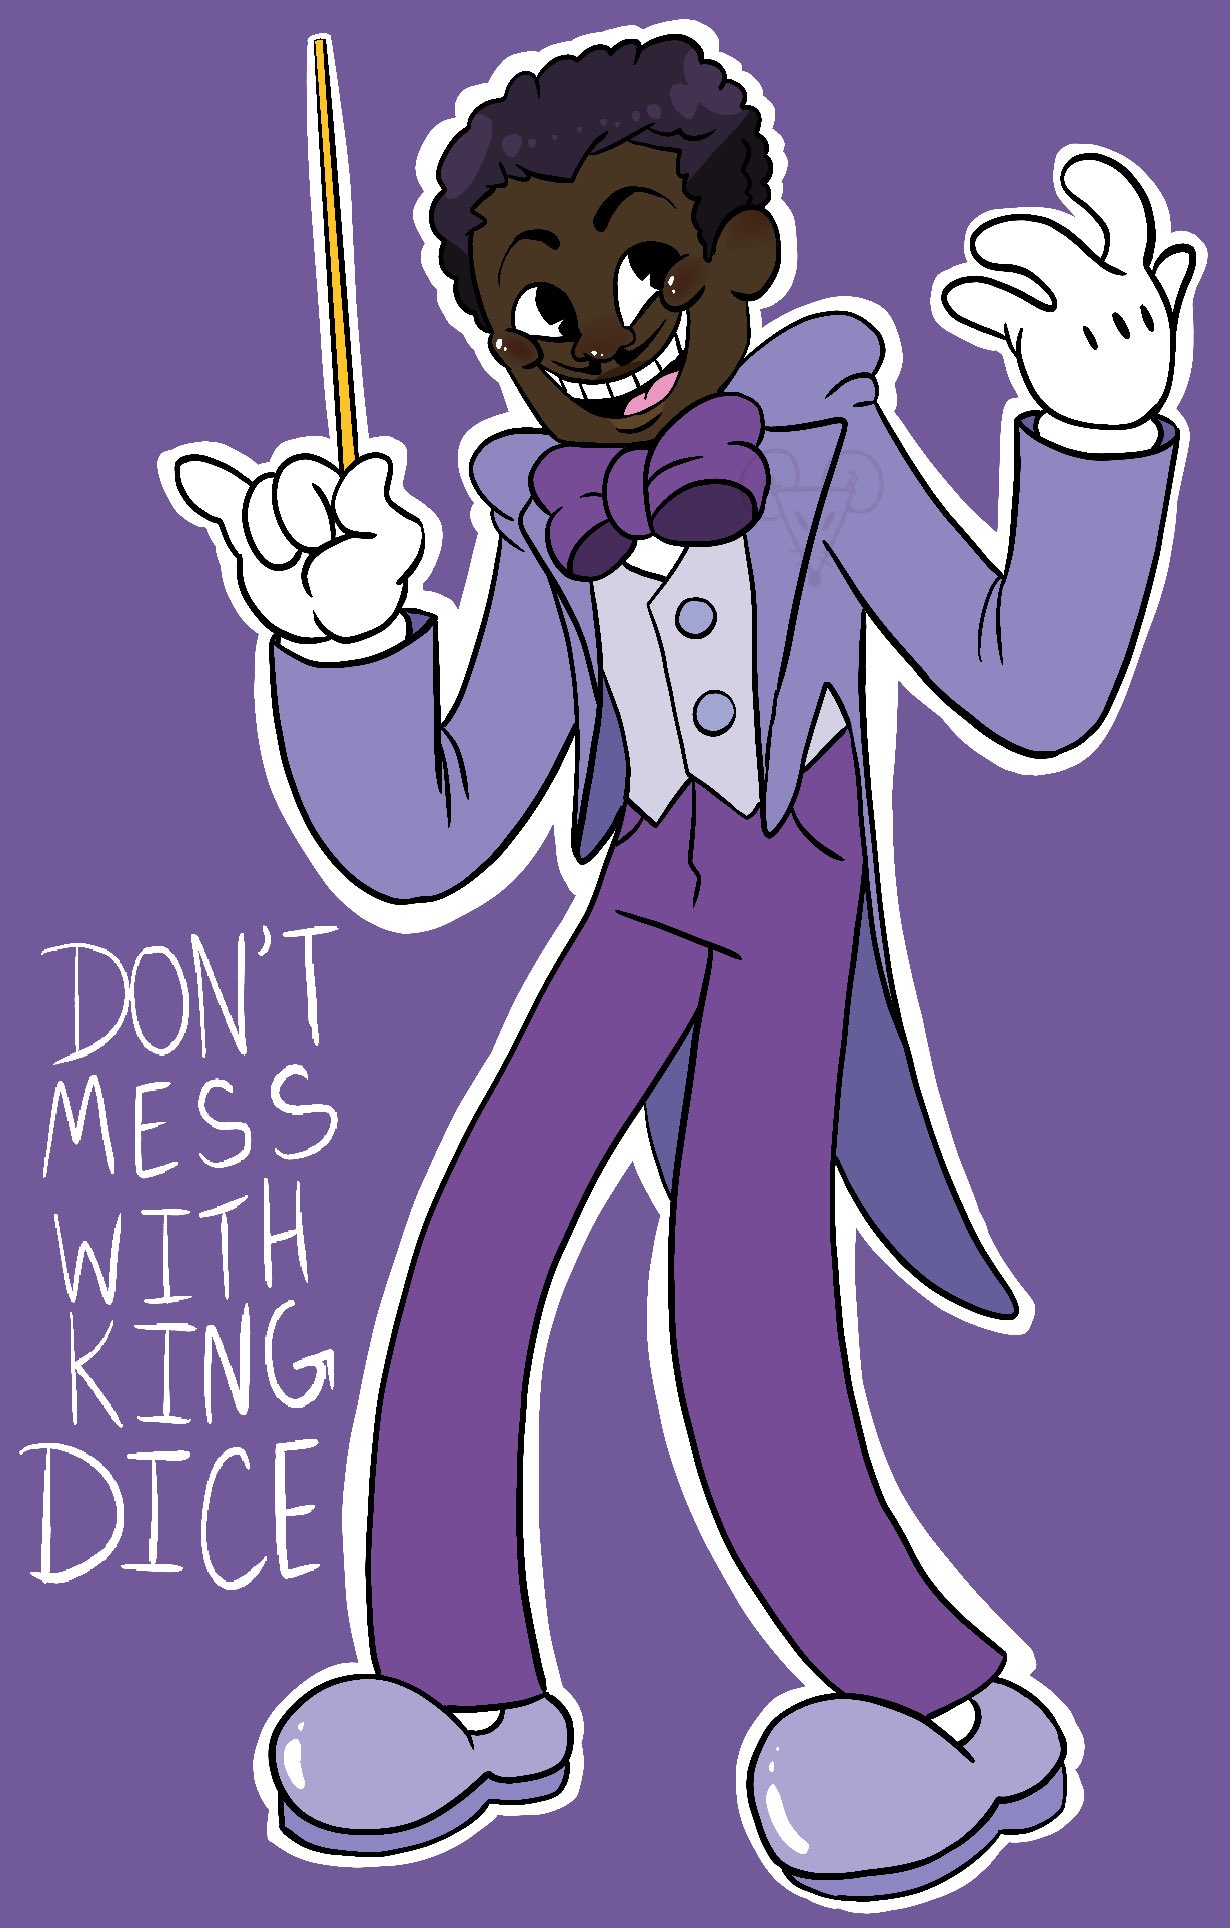 🌸Freddie🌸 on X: Not for a #blacktober prompt but I wanted to show off  how I imagine a Human King Dice💜💜so many ppl white wash him >:( #CupHead  #gijinka #kingdice #blacktober2020 #cupheaddontdealwiththedevil #